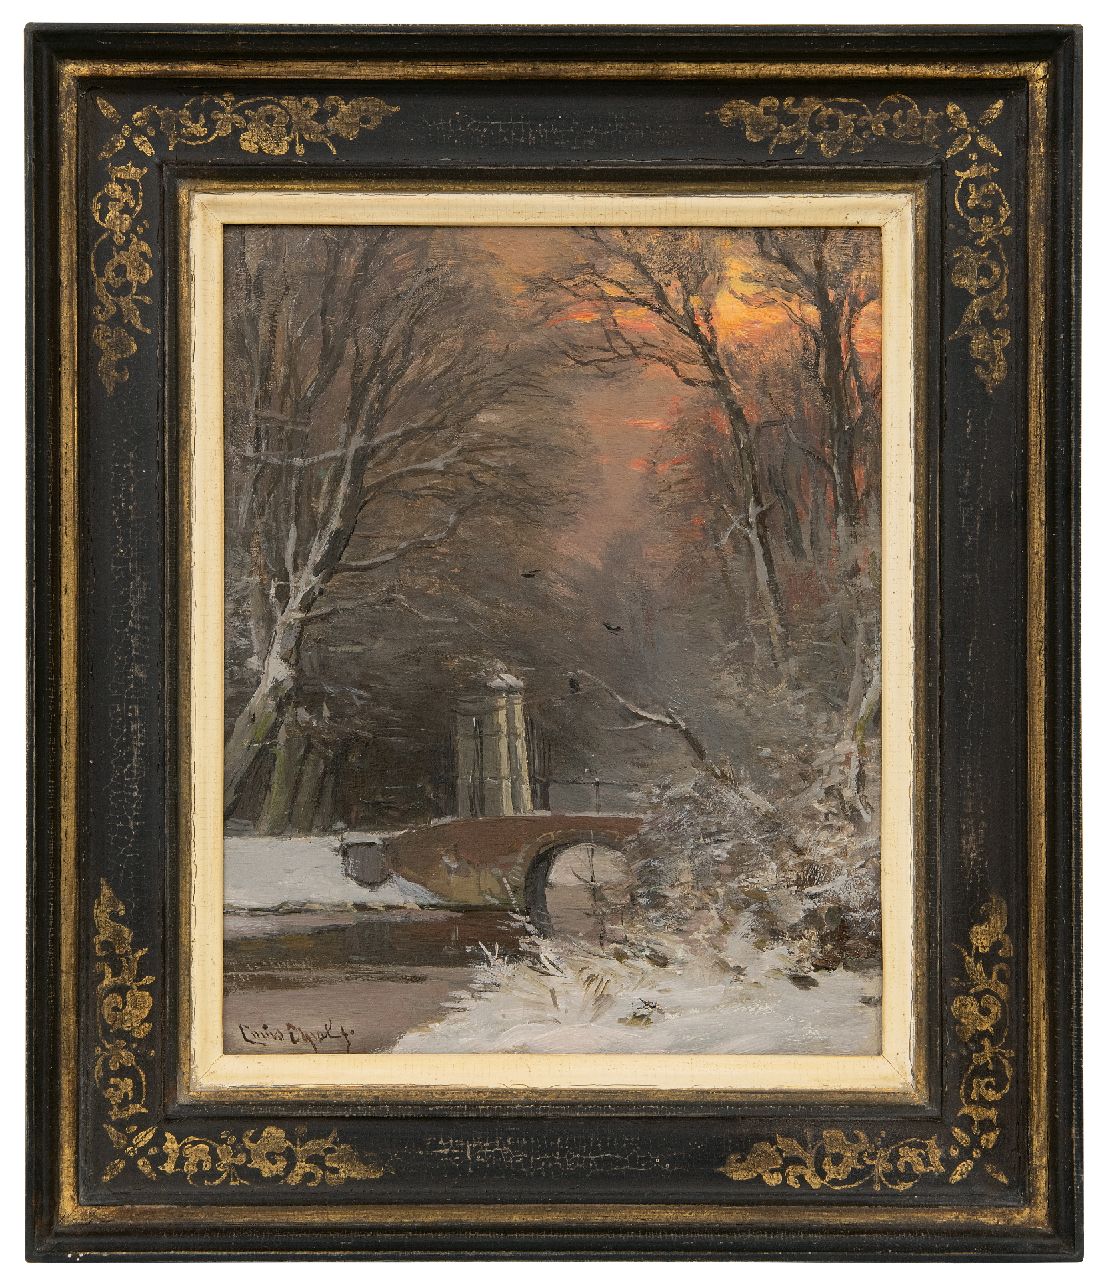 Apol L.F.H.  | Lodewijk Franciscus Hendrik 'Louis' Apol | Paintings offered for sale | View in a snowy forest at dusk, oil on panel 27.4 x 21.9 cm, signed l.l.